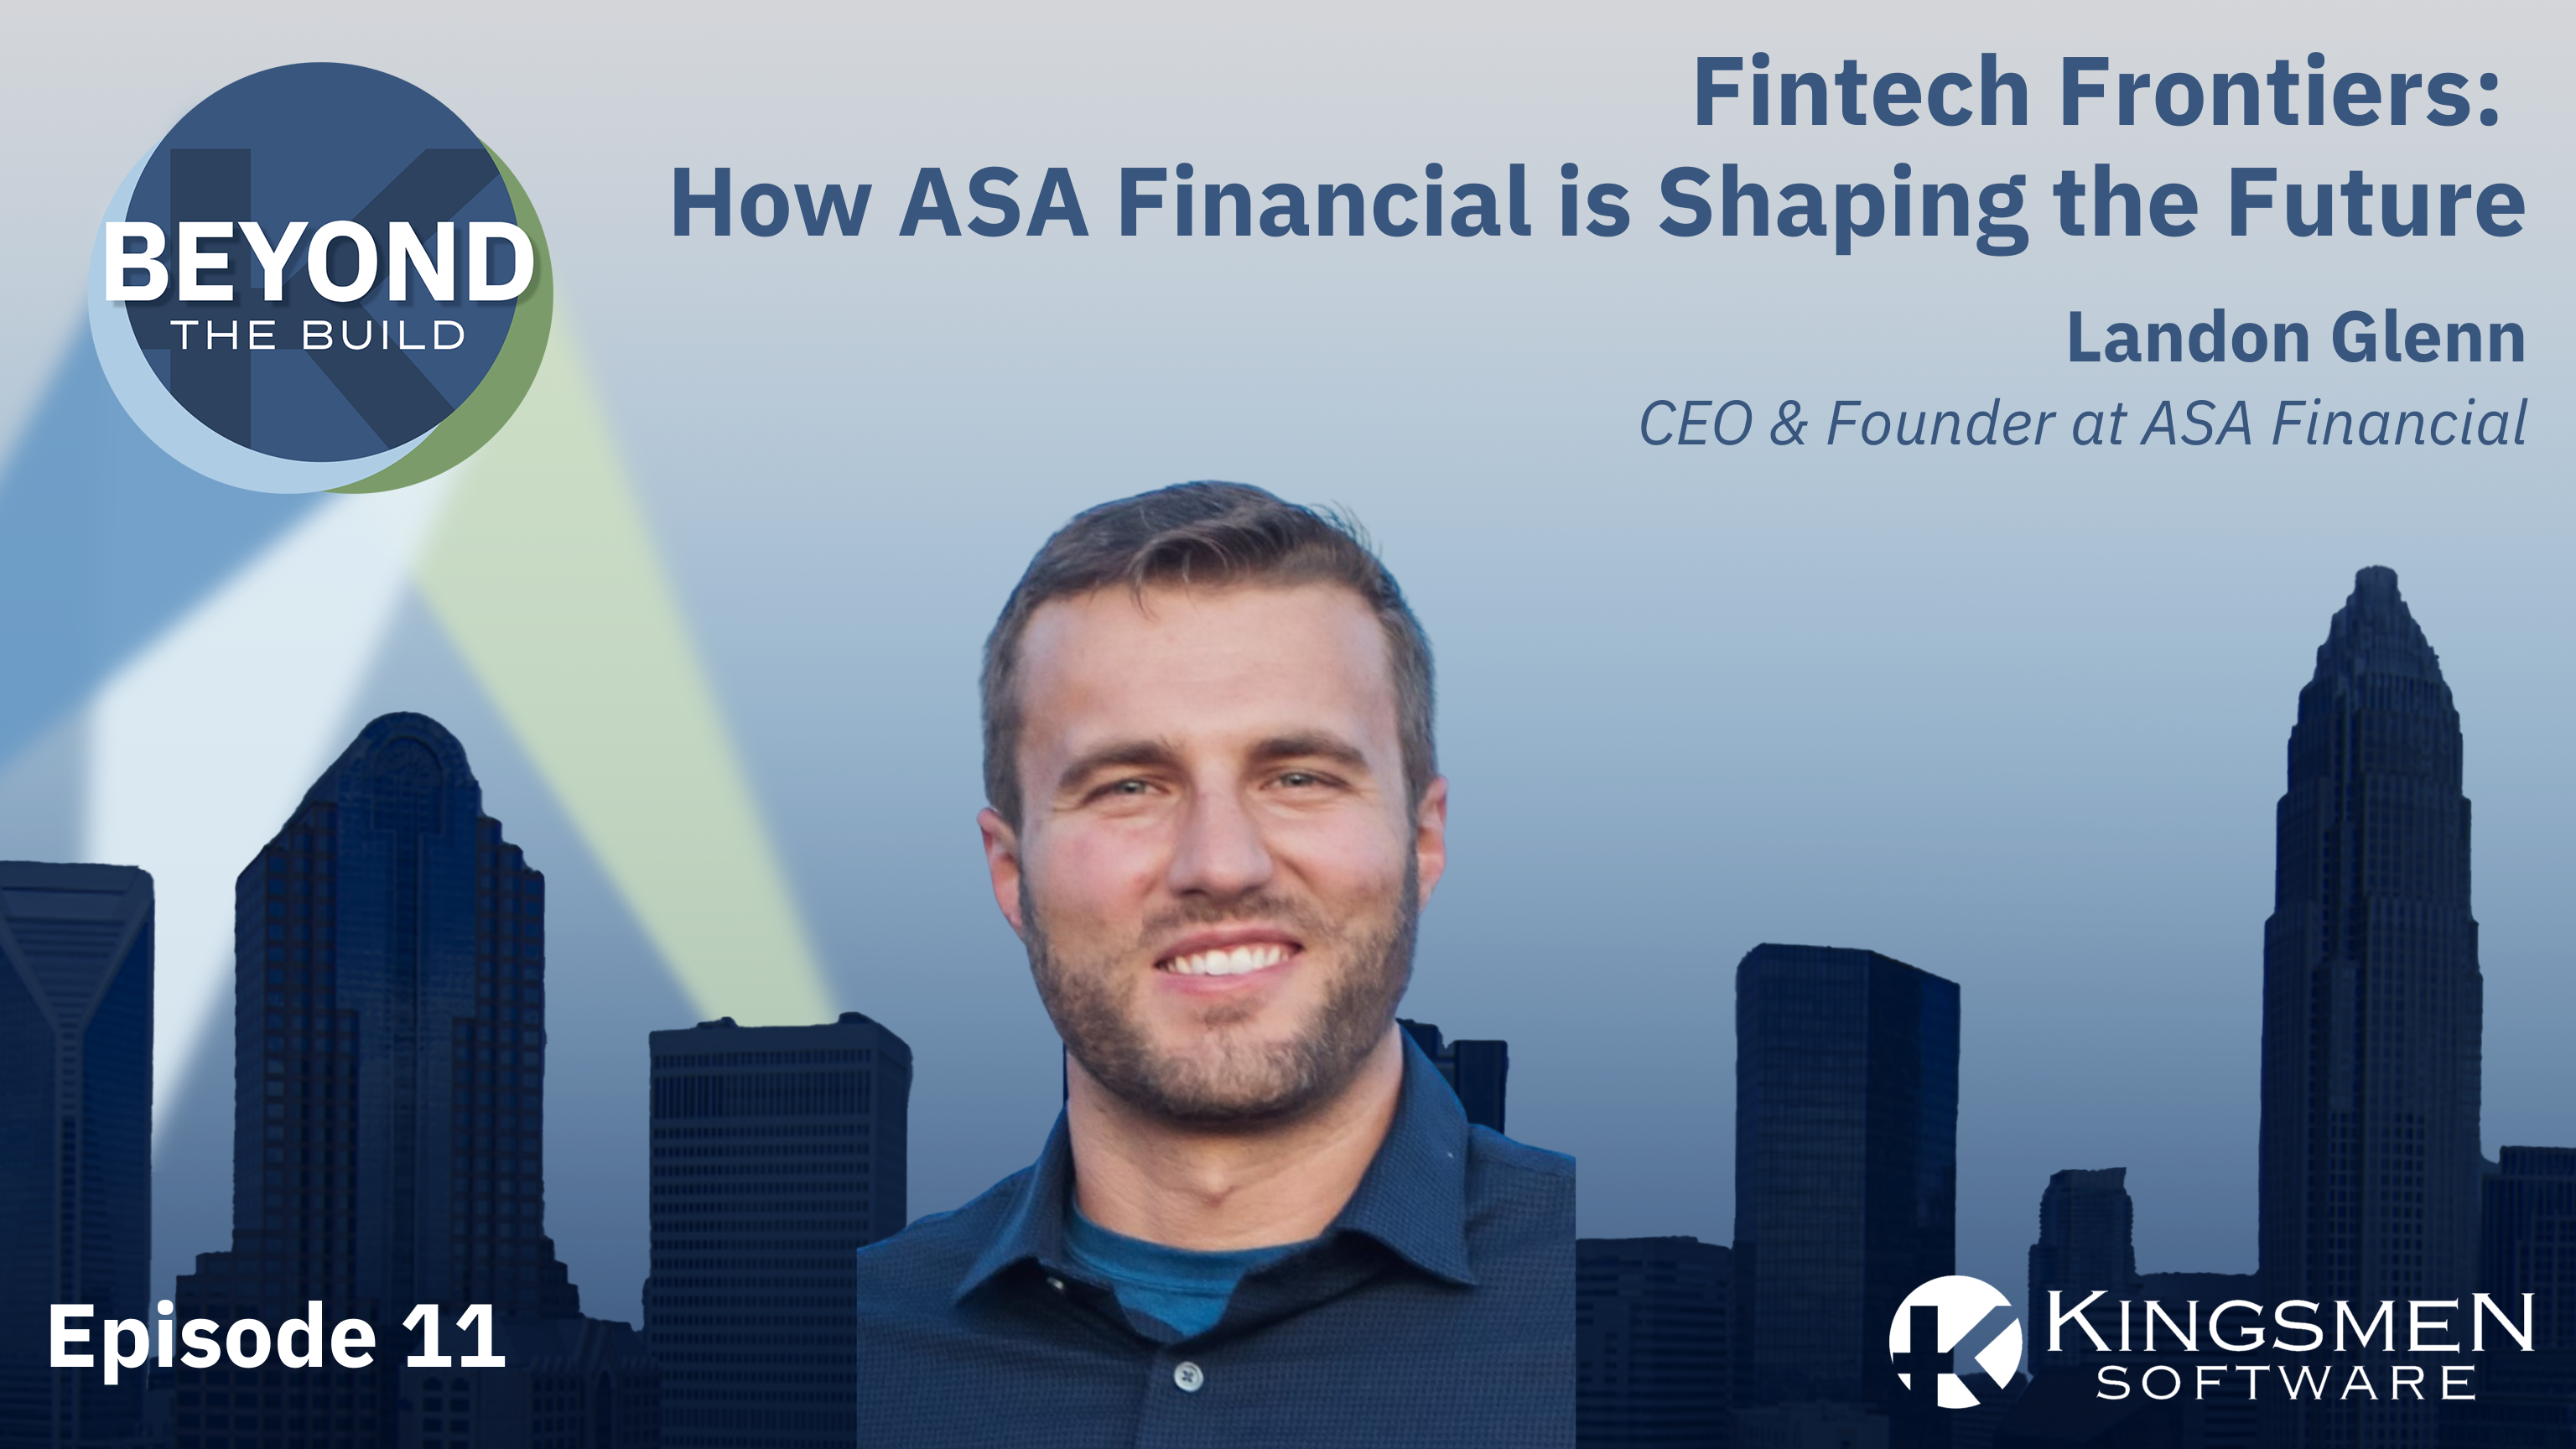 Episode 11: Fintech Frontiers -How ASA Financial is Shaping the Future